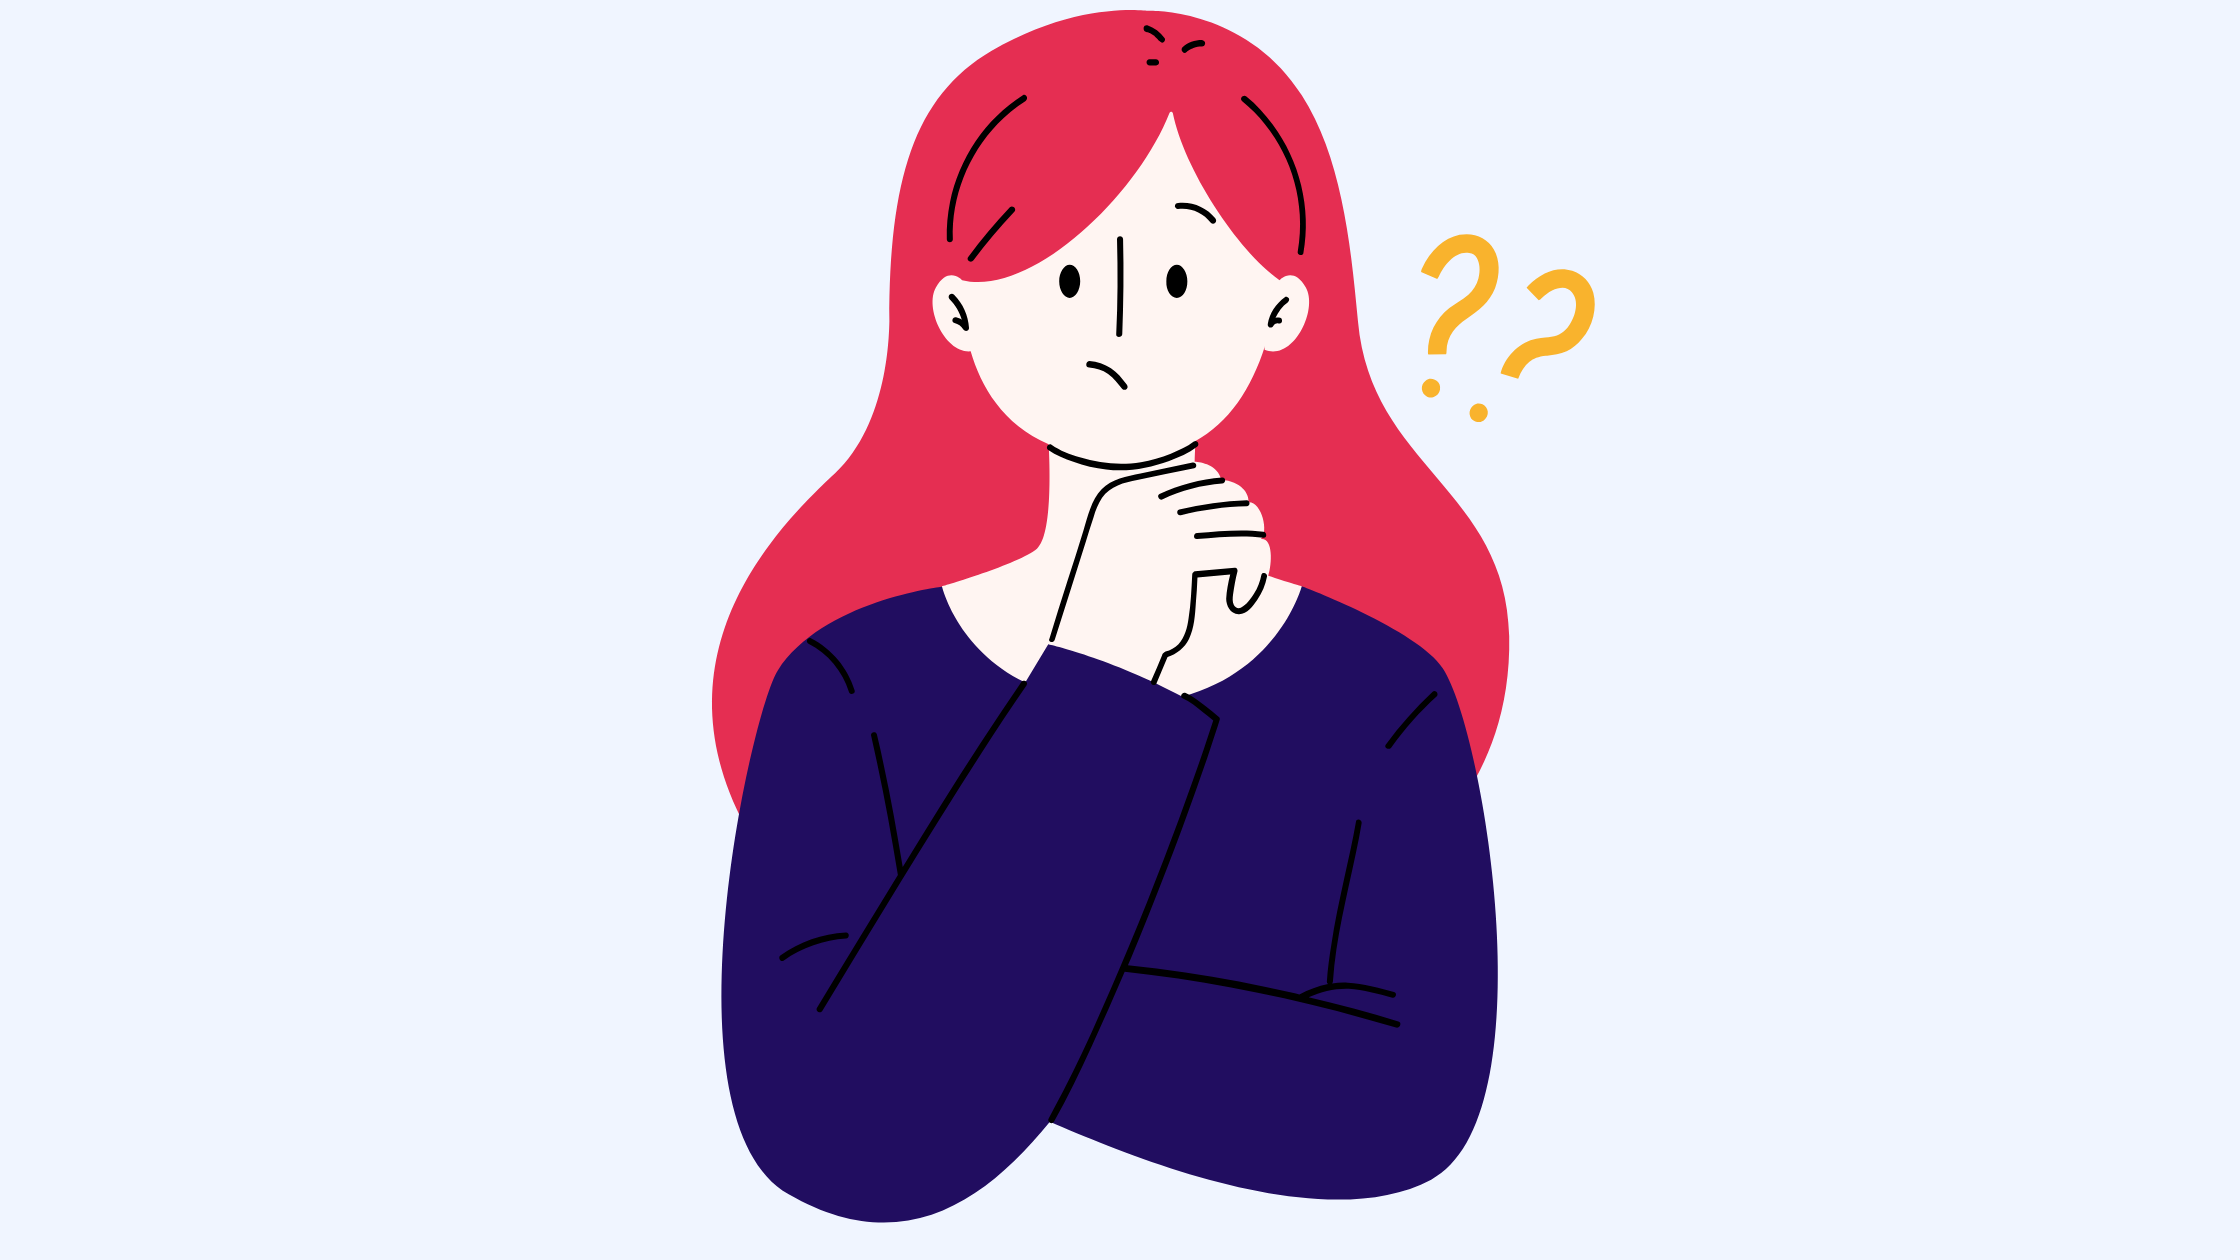 graphic of a woman with question marks next to her